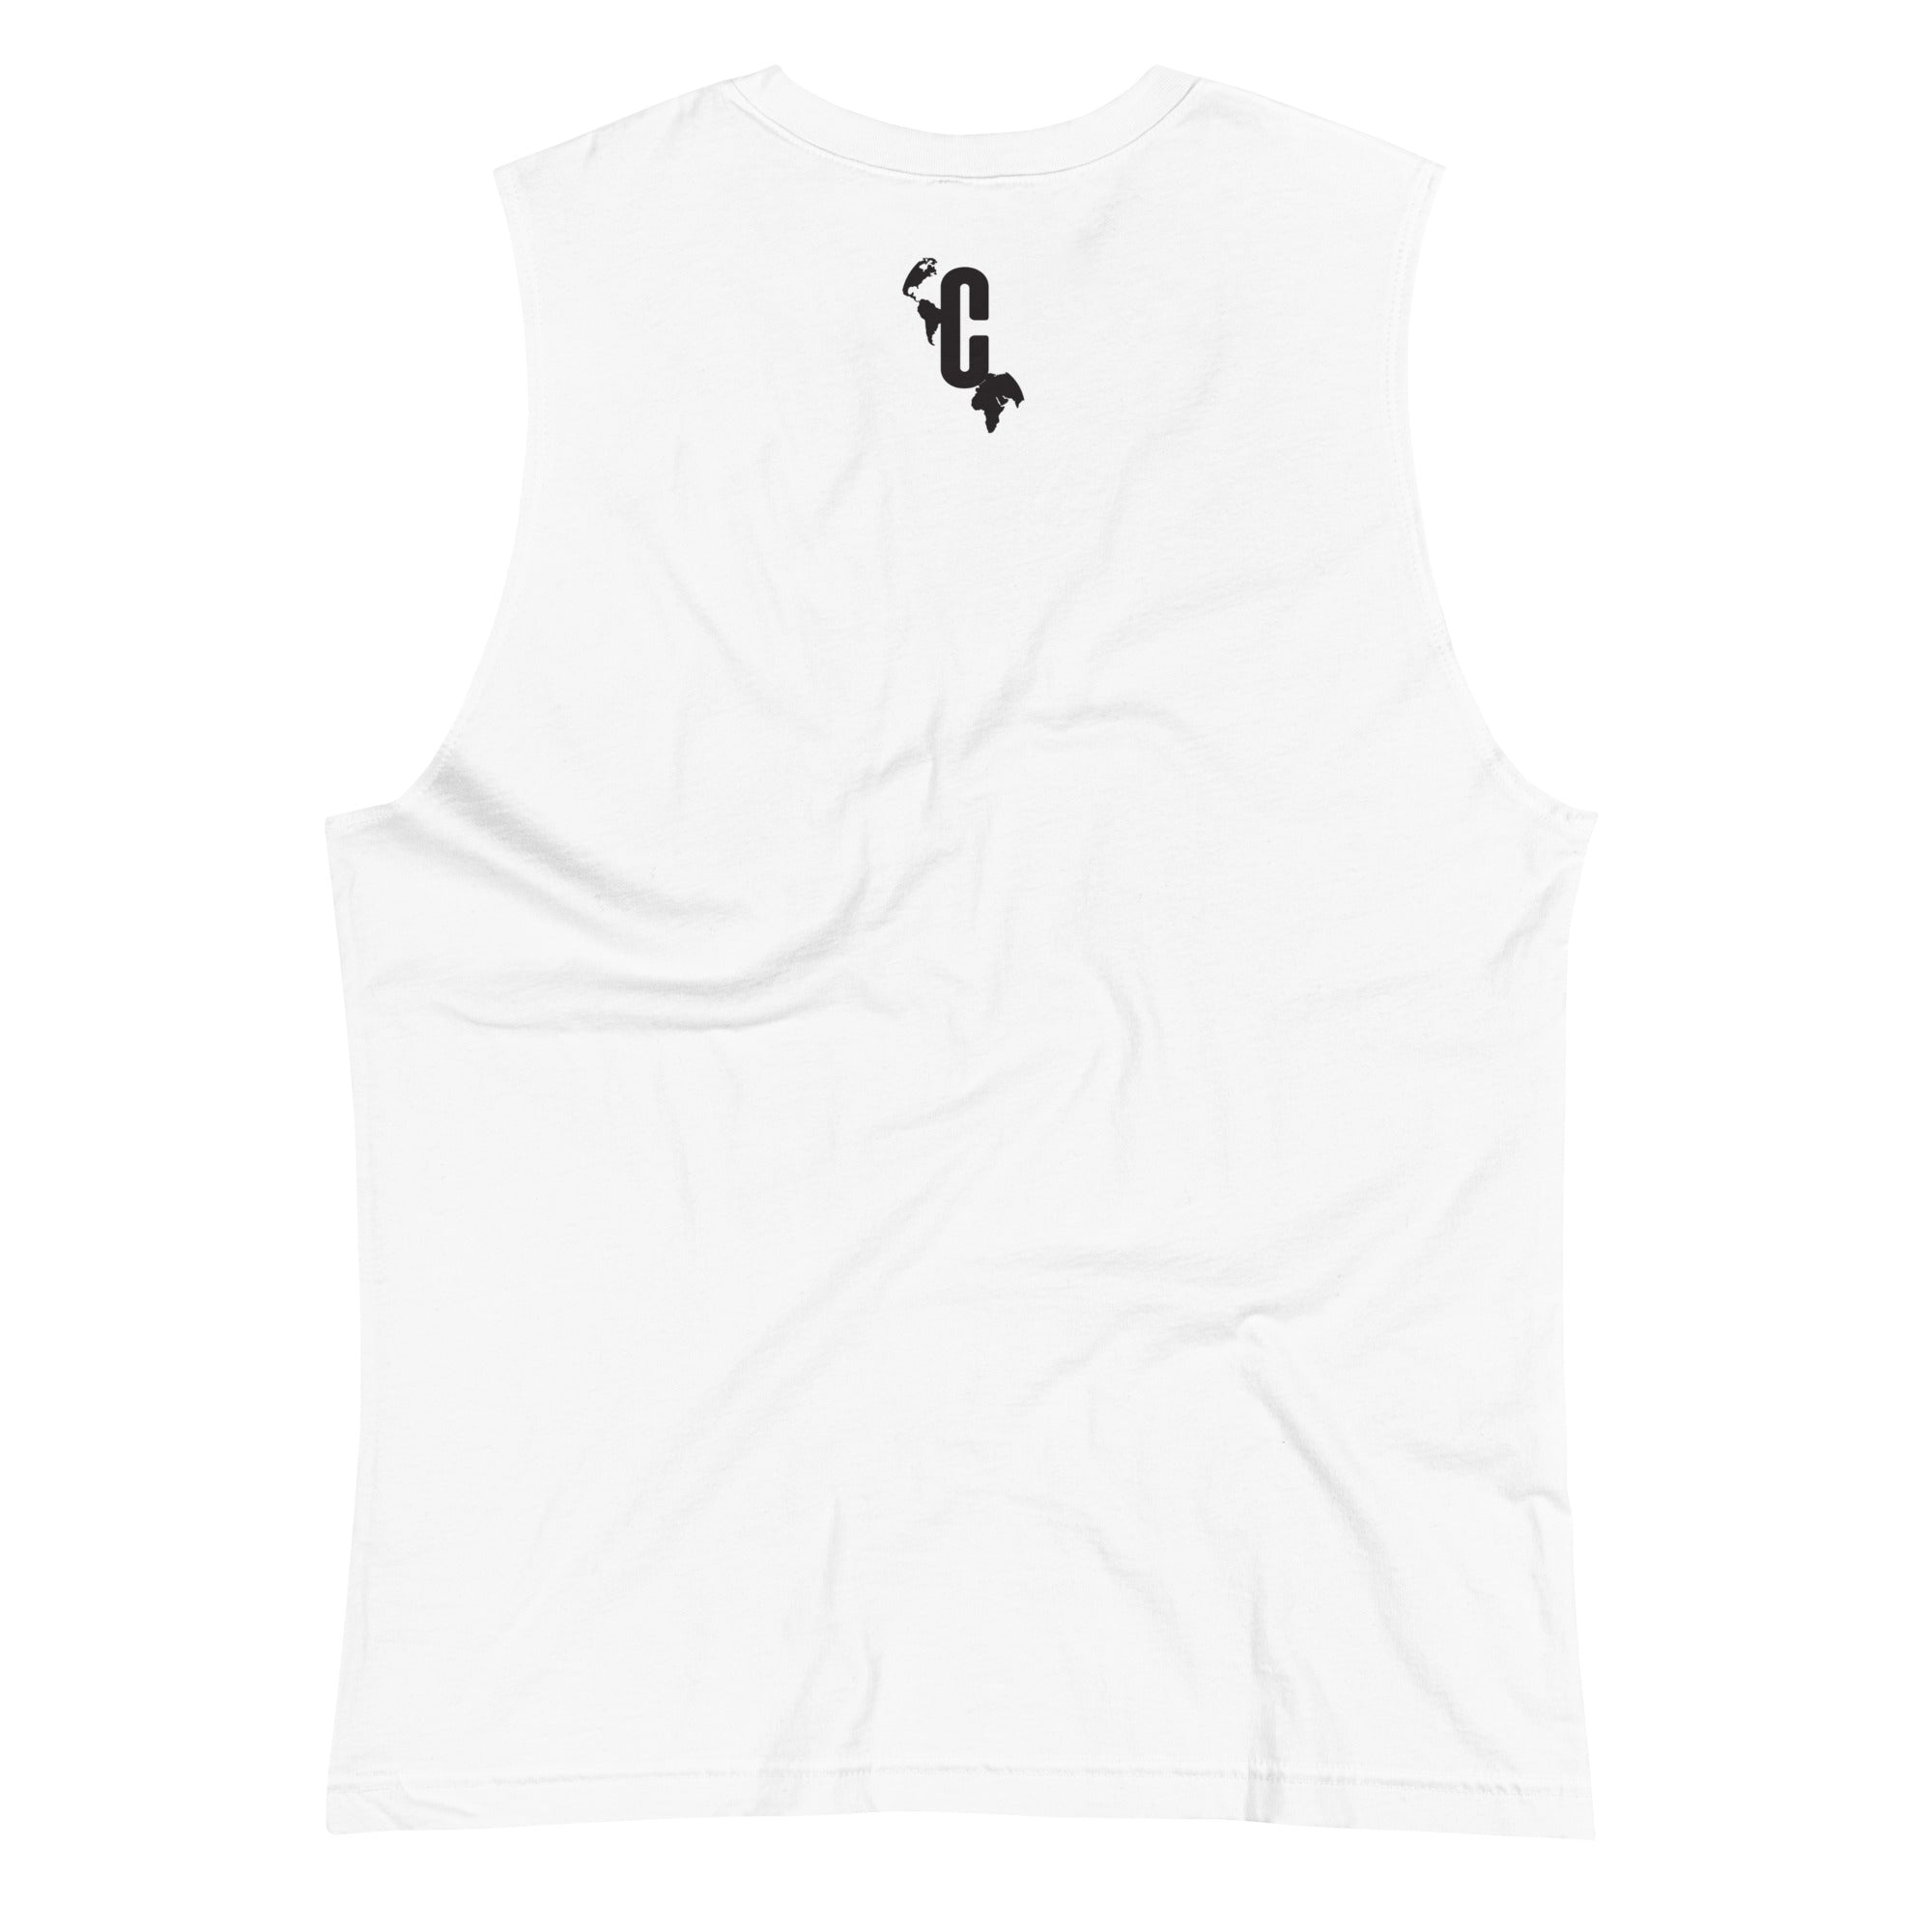 The Skate Life Men's Muscle Tank Top: A Homage to the History of Quad Skates RGB